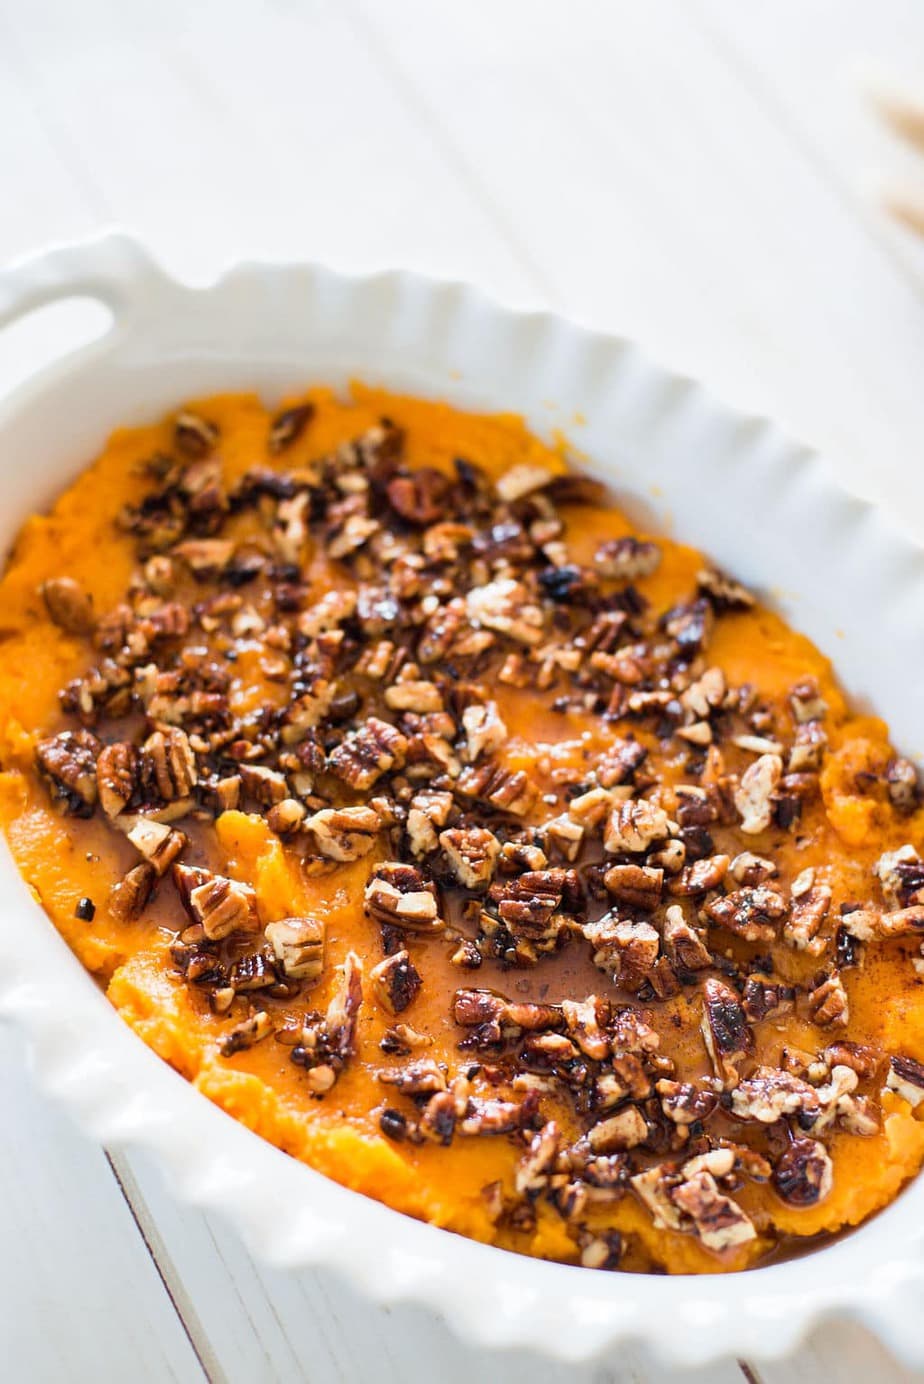 Close up photo of healthy sweet potato casserole in a white oval baking dish on a white wooden background. The mashed sweet potatoes are topped with a toasted pecan streussel.